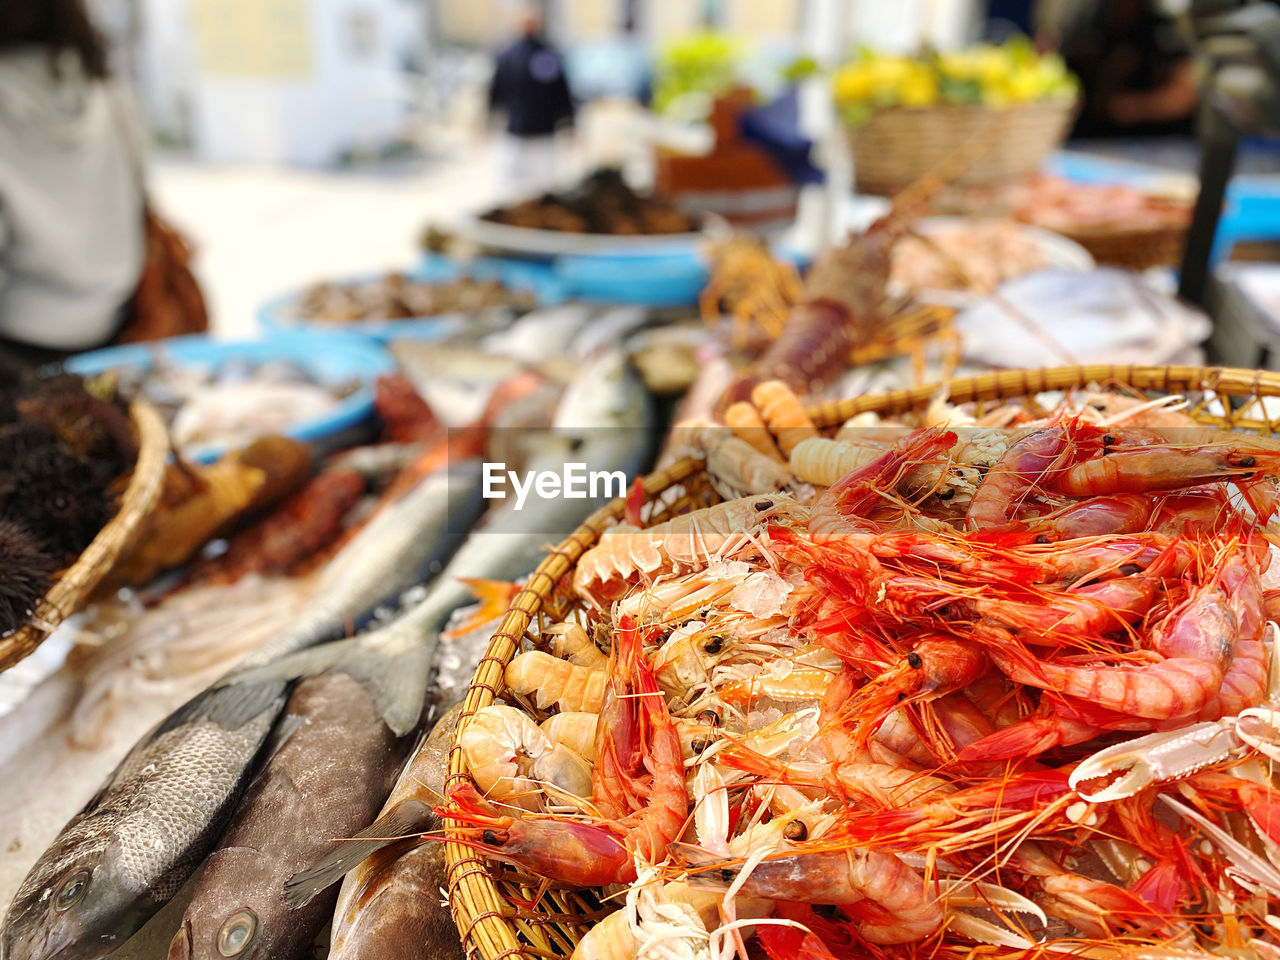 close-up of seafood for sale in market